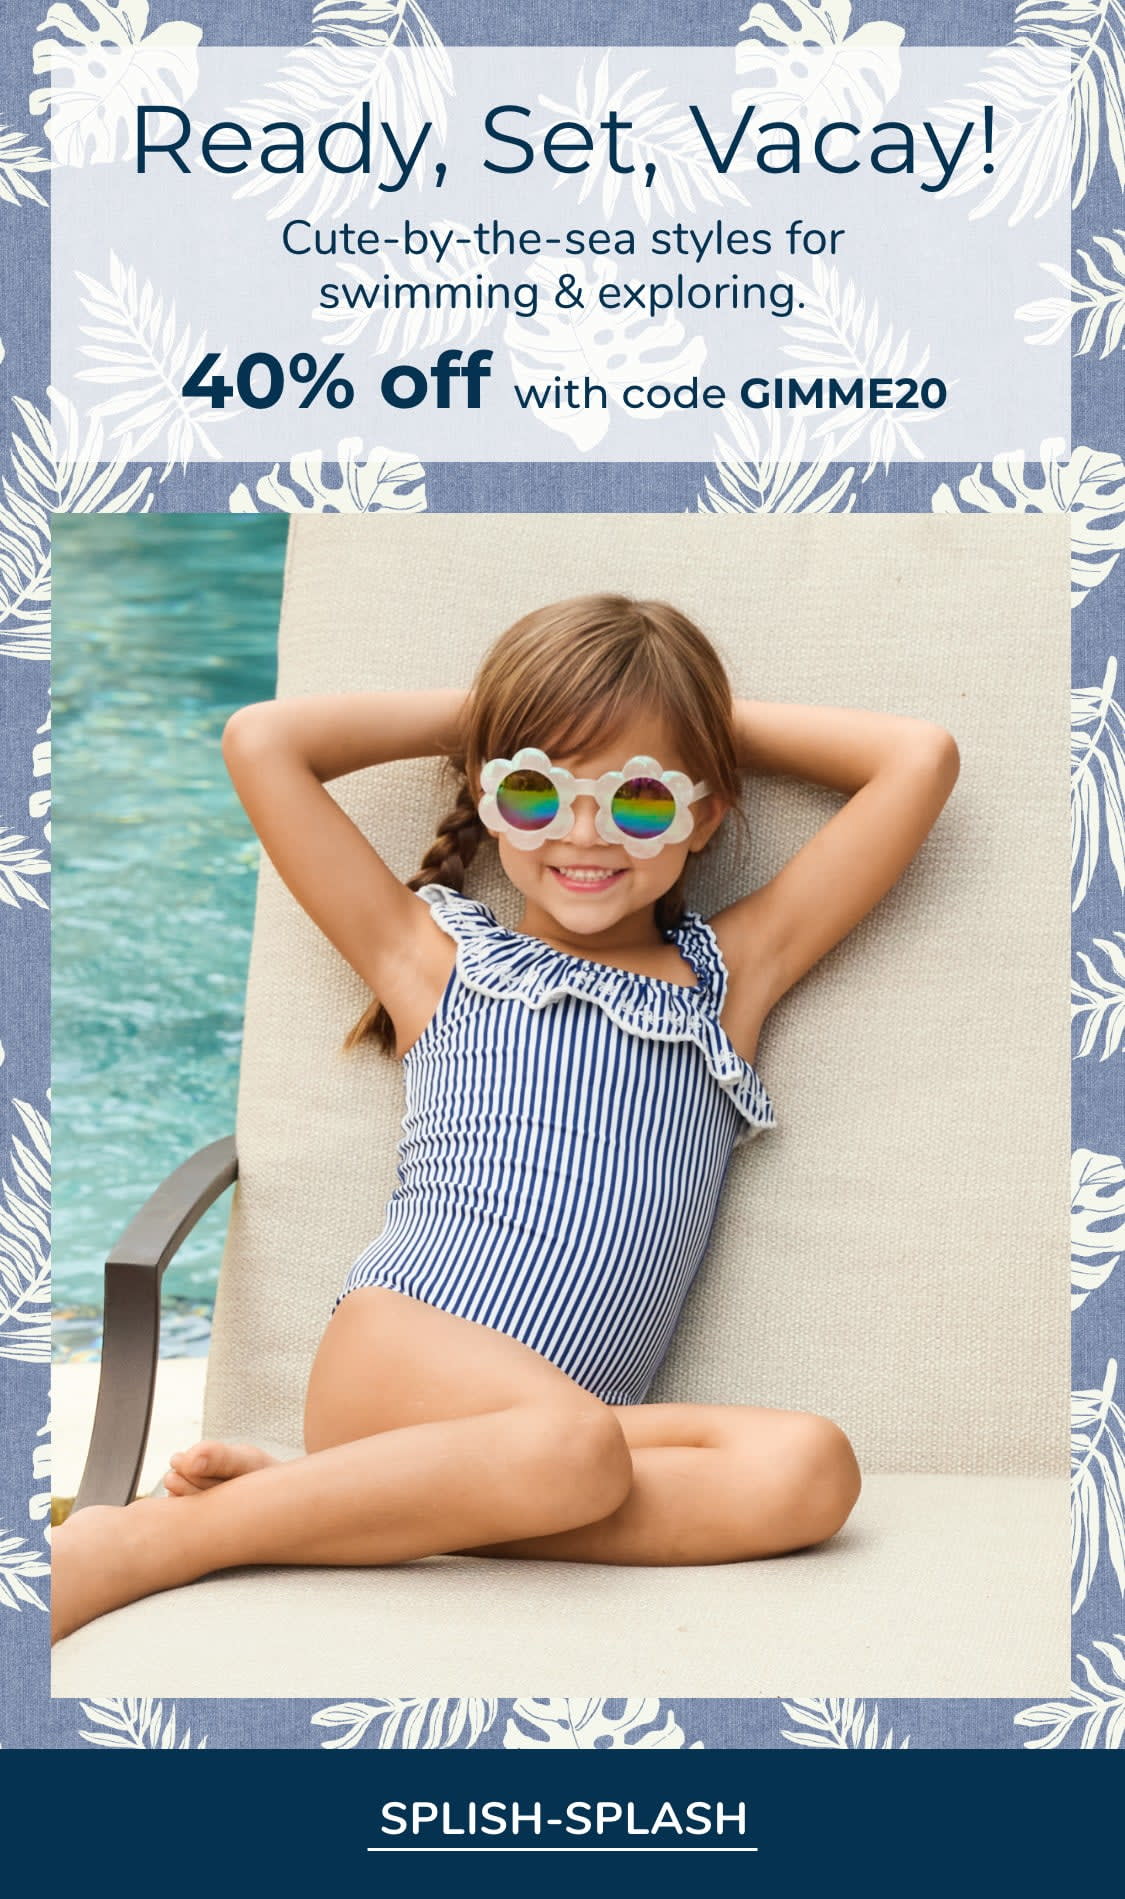 Ready, Set, Vacay! Cute-by-the-sea styles for swimming & exploring.